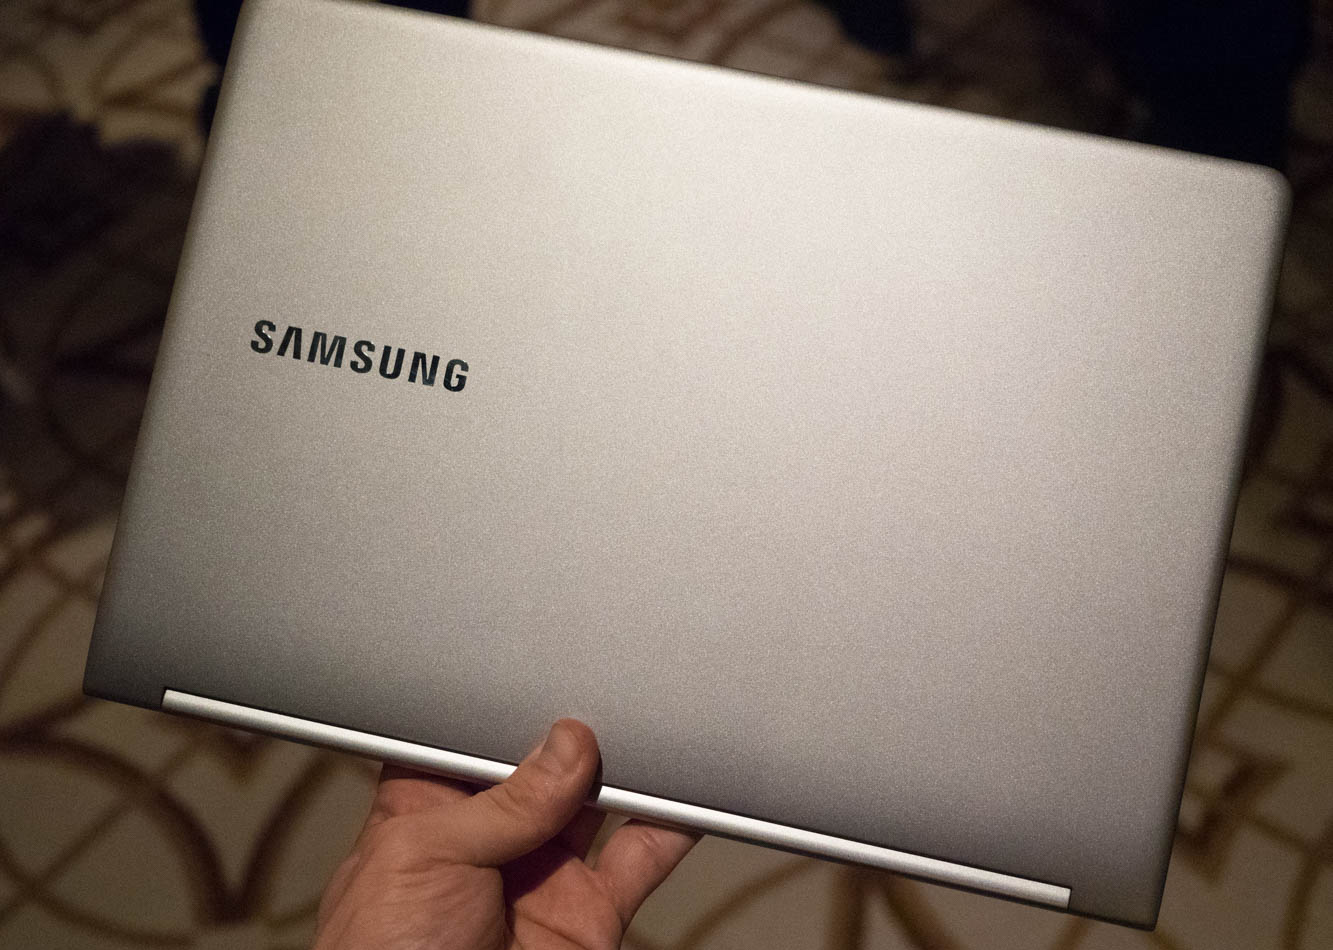 Samsung’s New Notebook 9 Laptops Are Preposterously Light